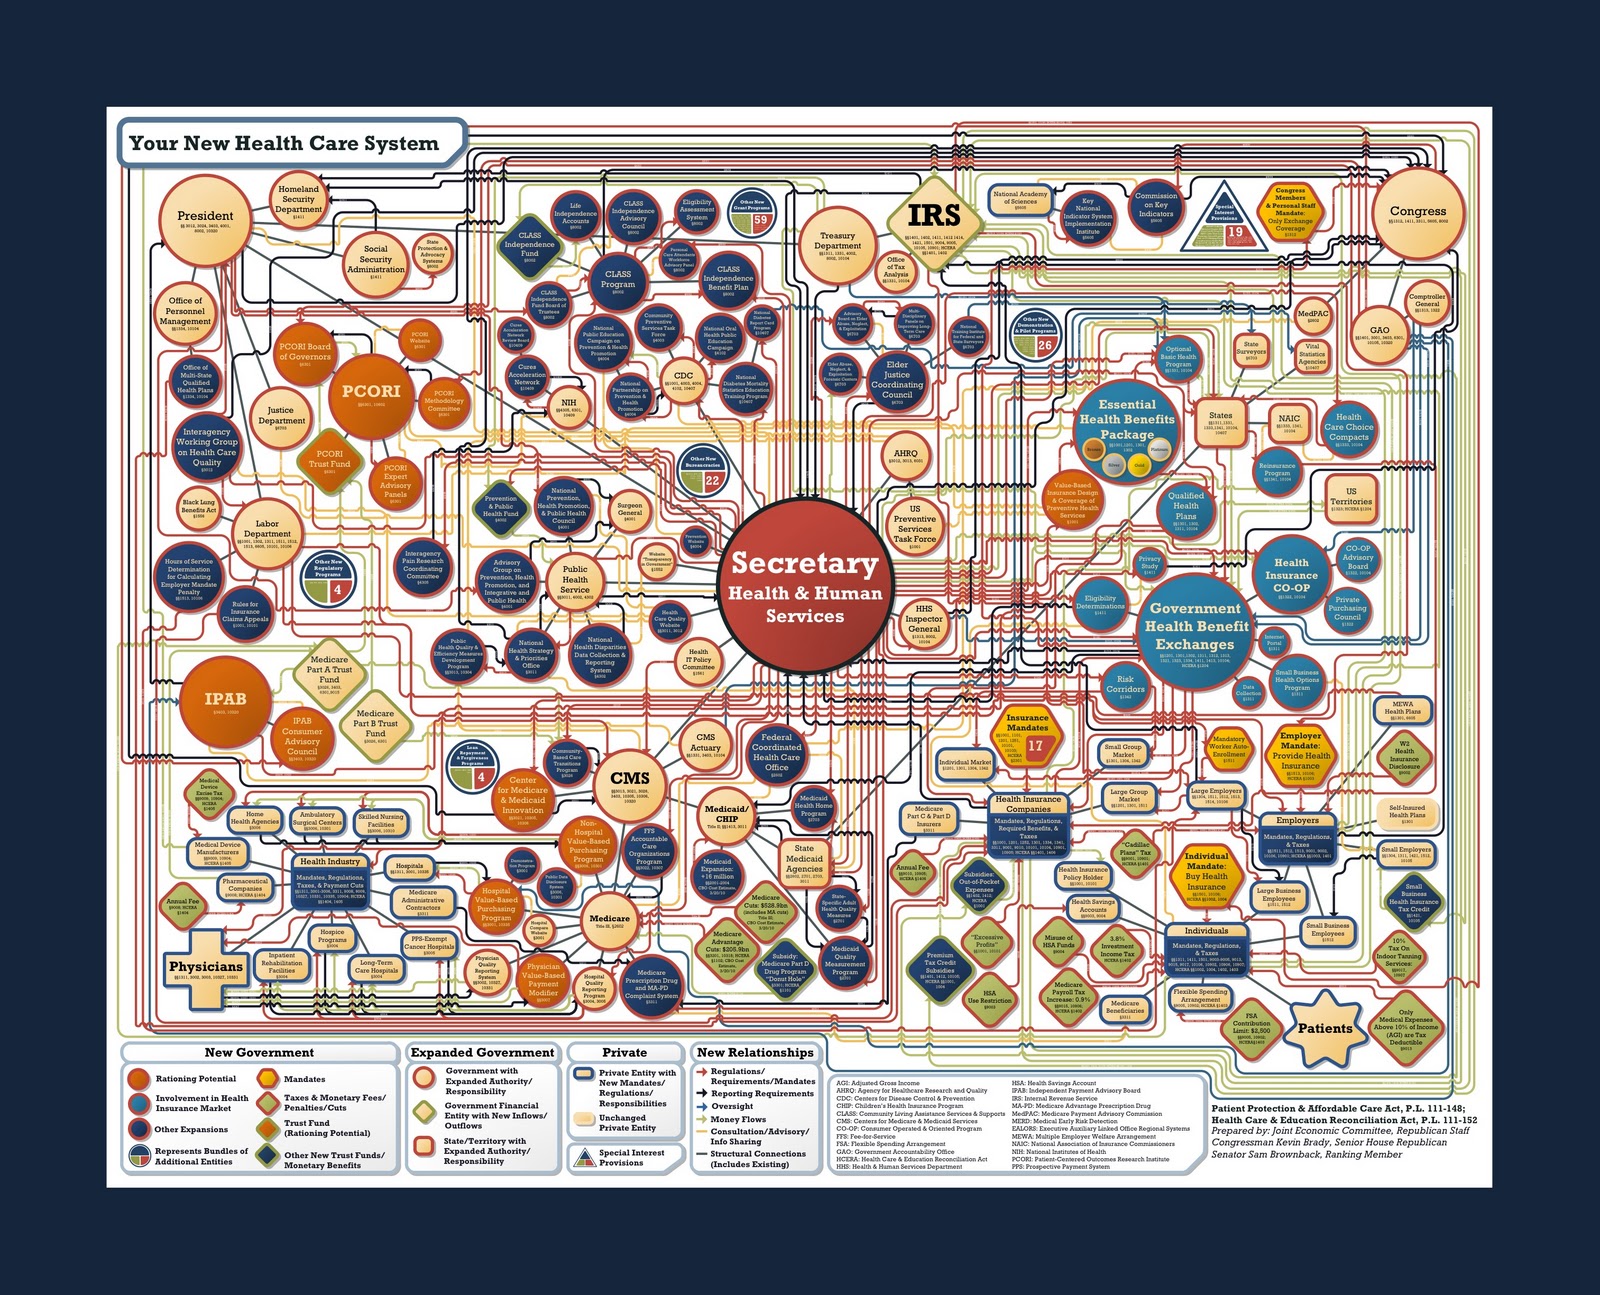 Kingdom Triangle Network News Service: Your New Health Care System Chart